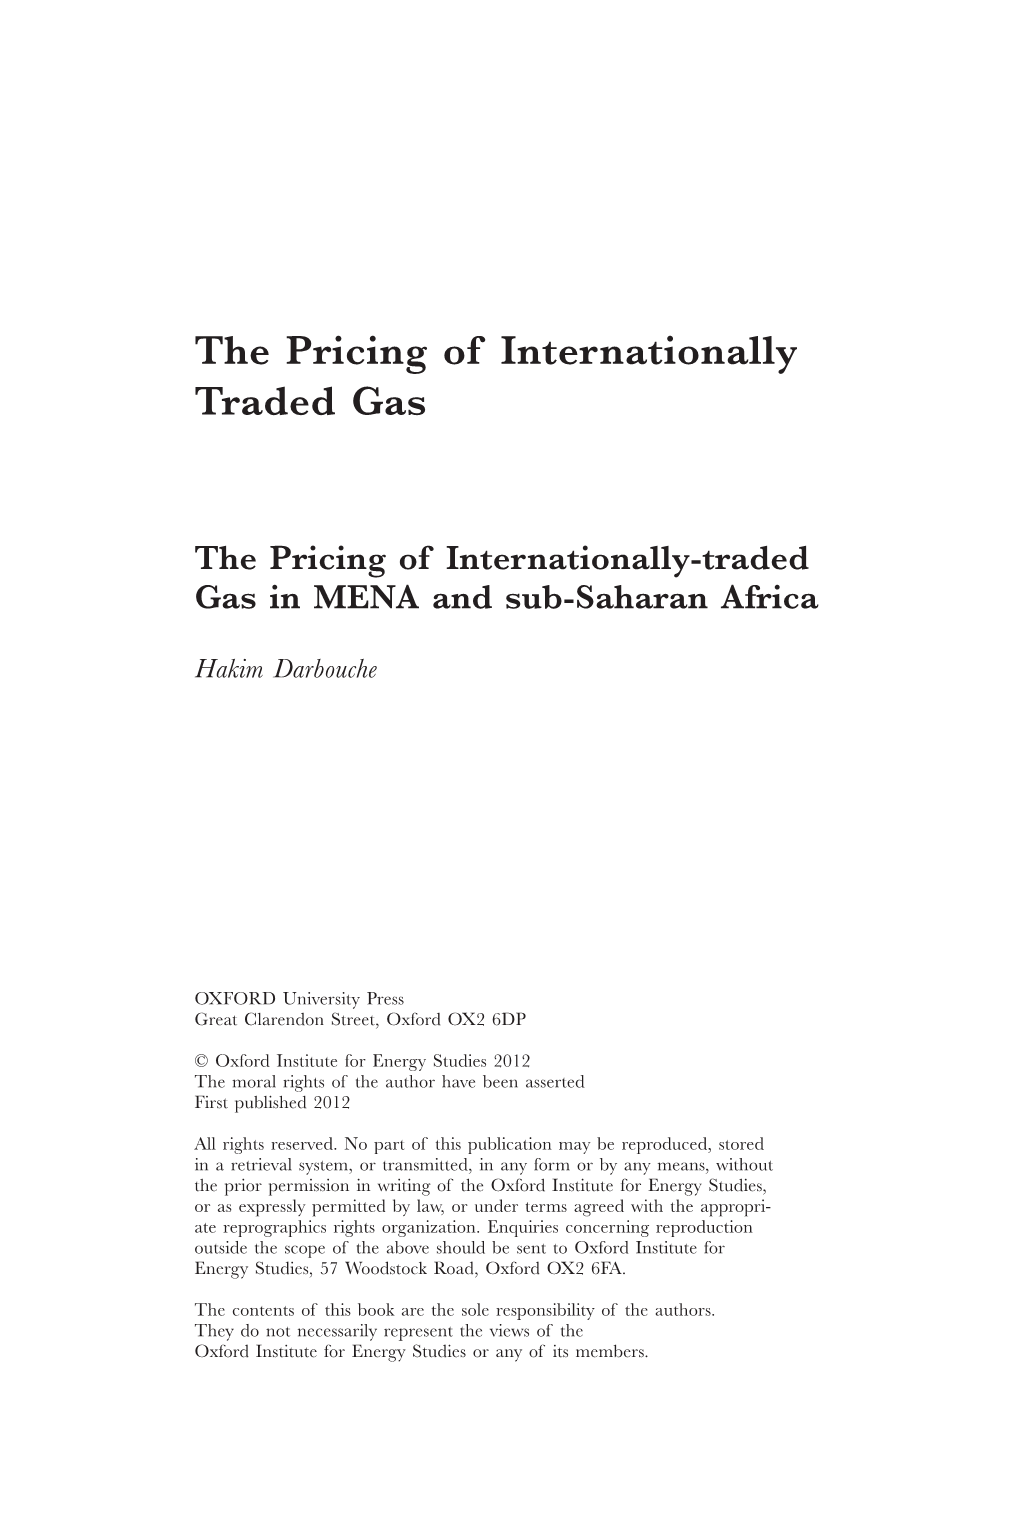 The Pricing of Internationally Traded Gas